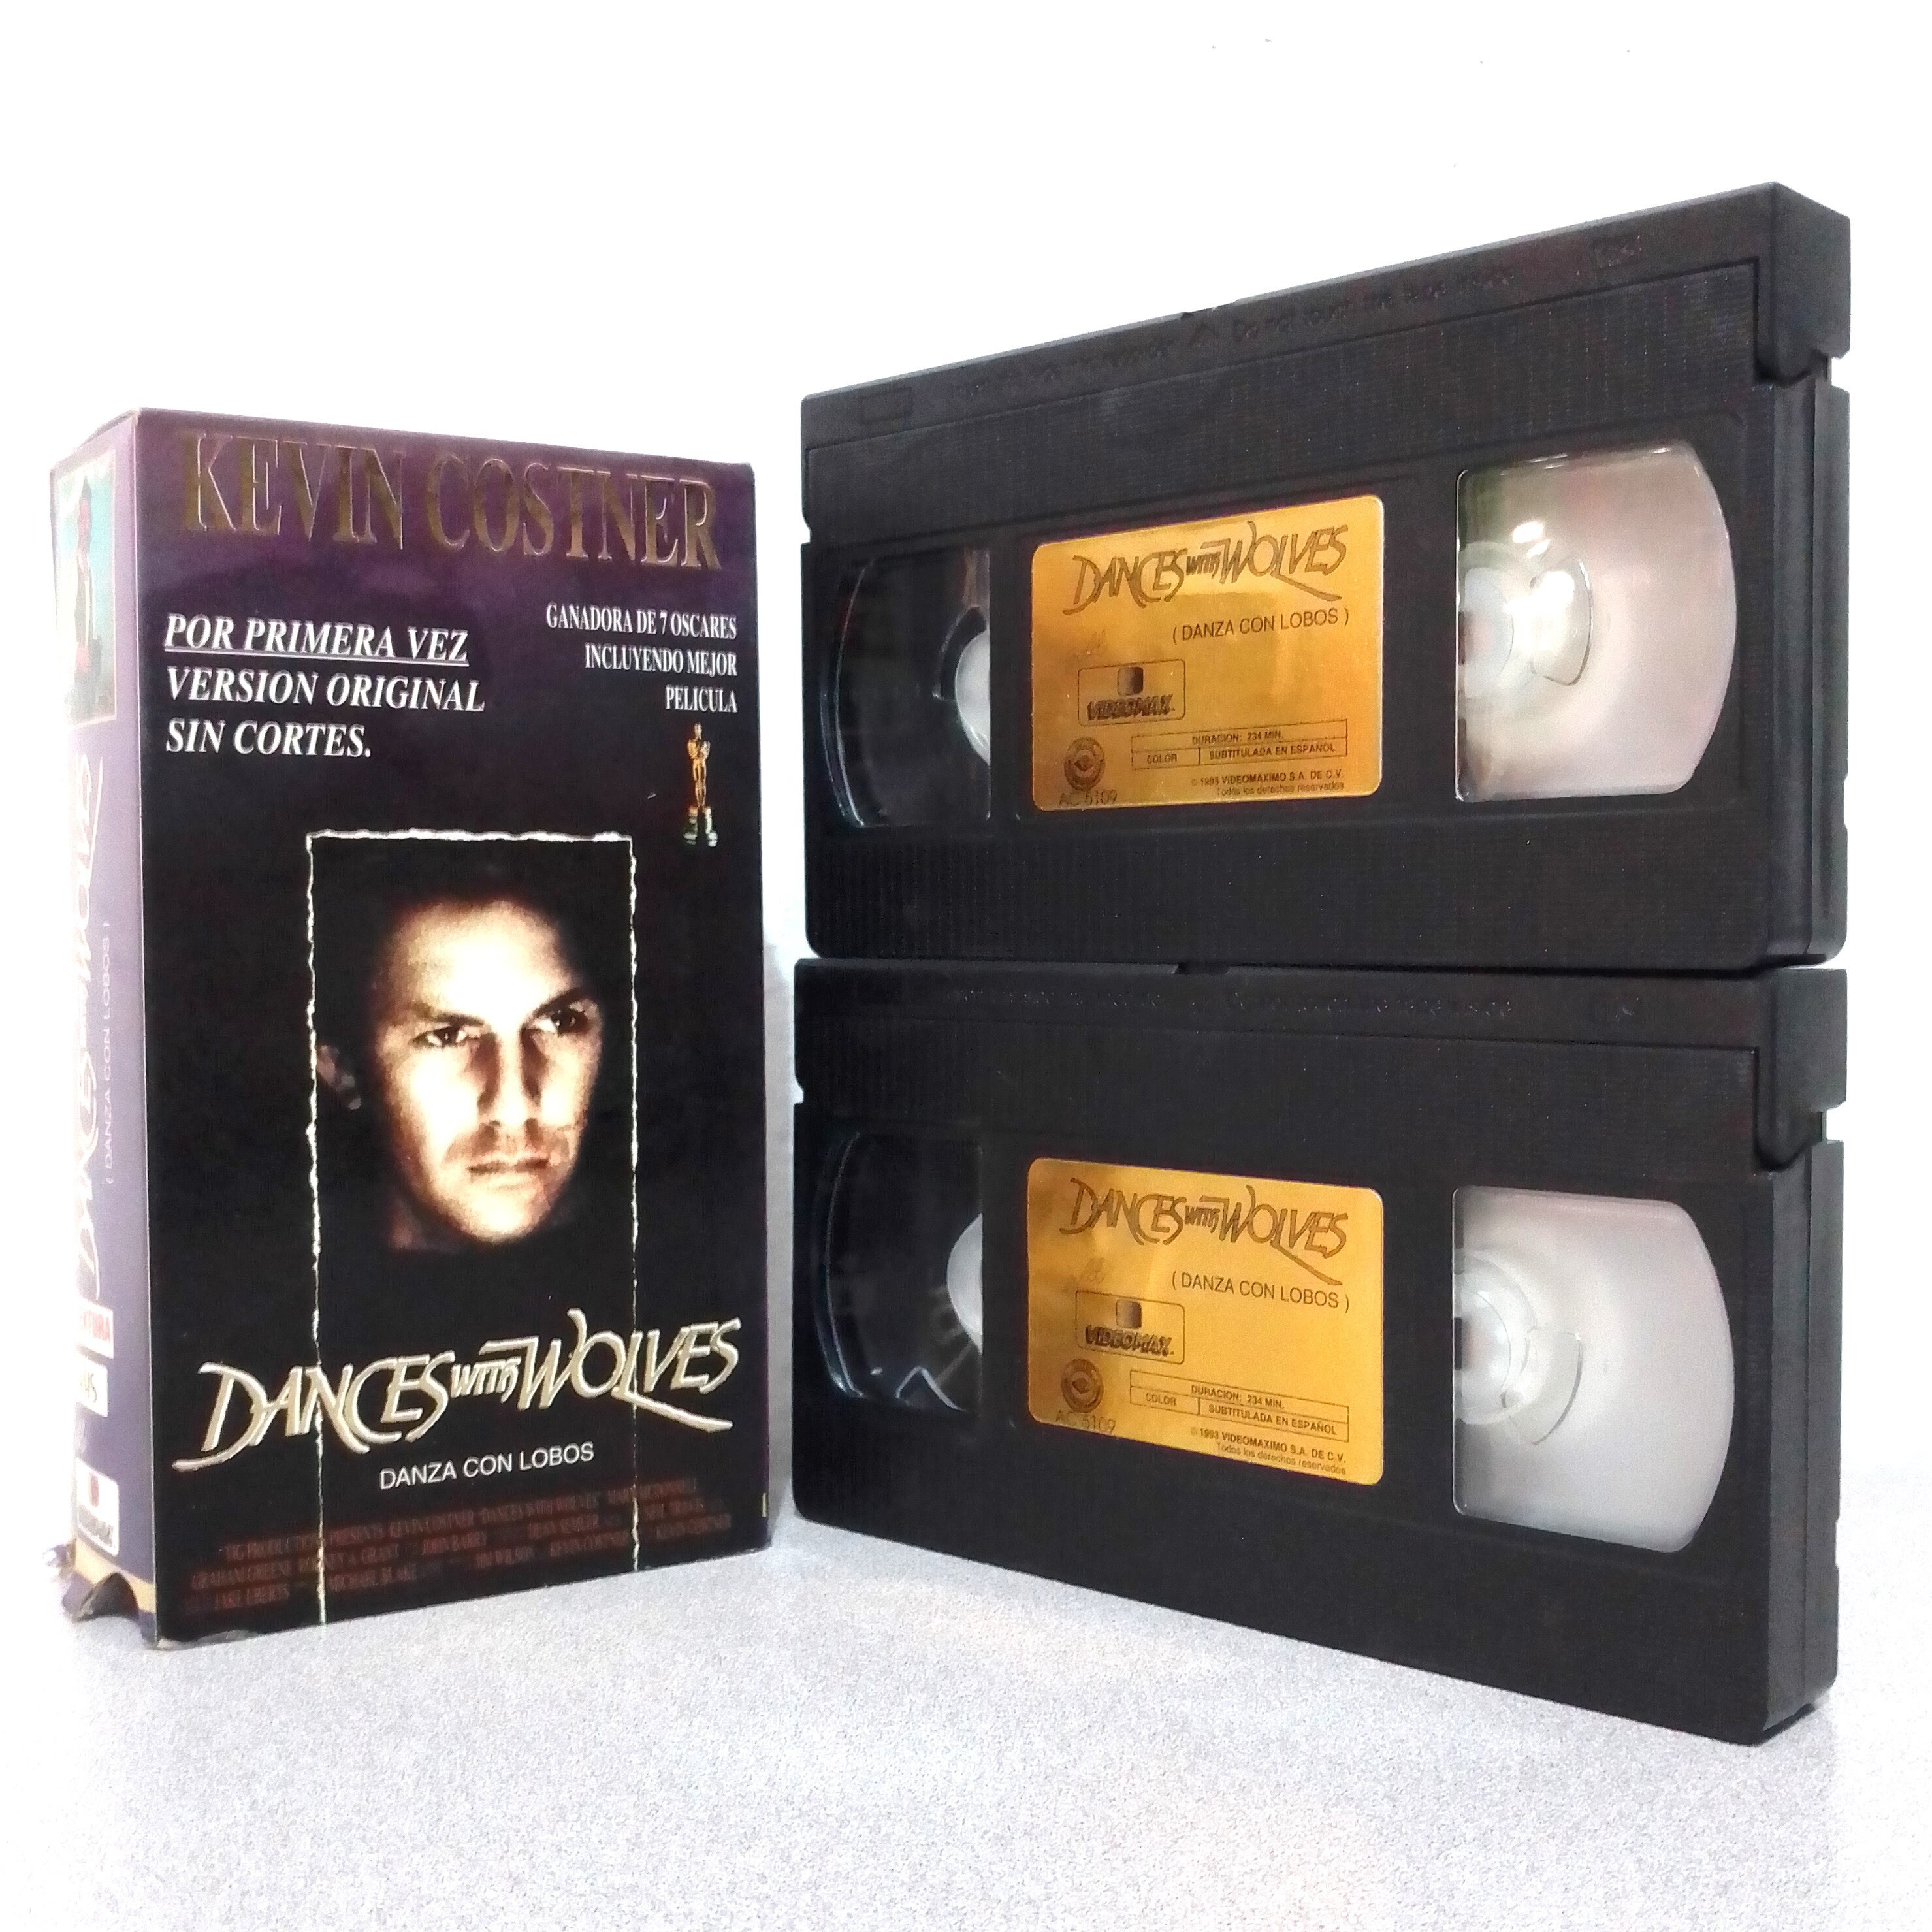 Dances With Wolves. 1993 VHS Double Tape Edition. Sub Spanish - Etsy